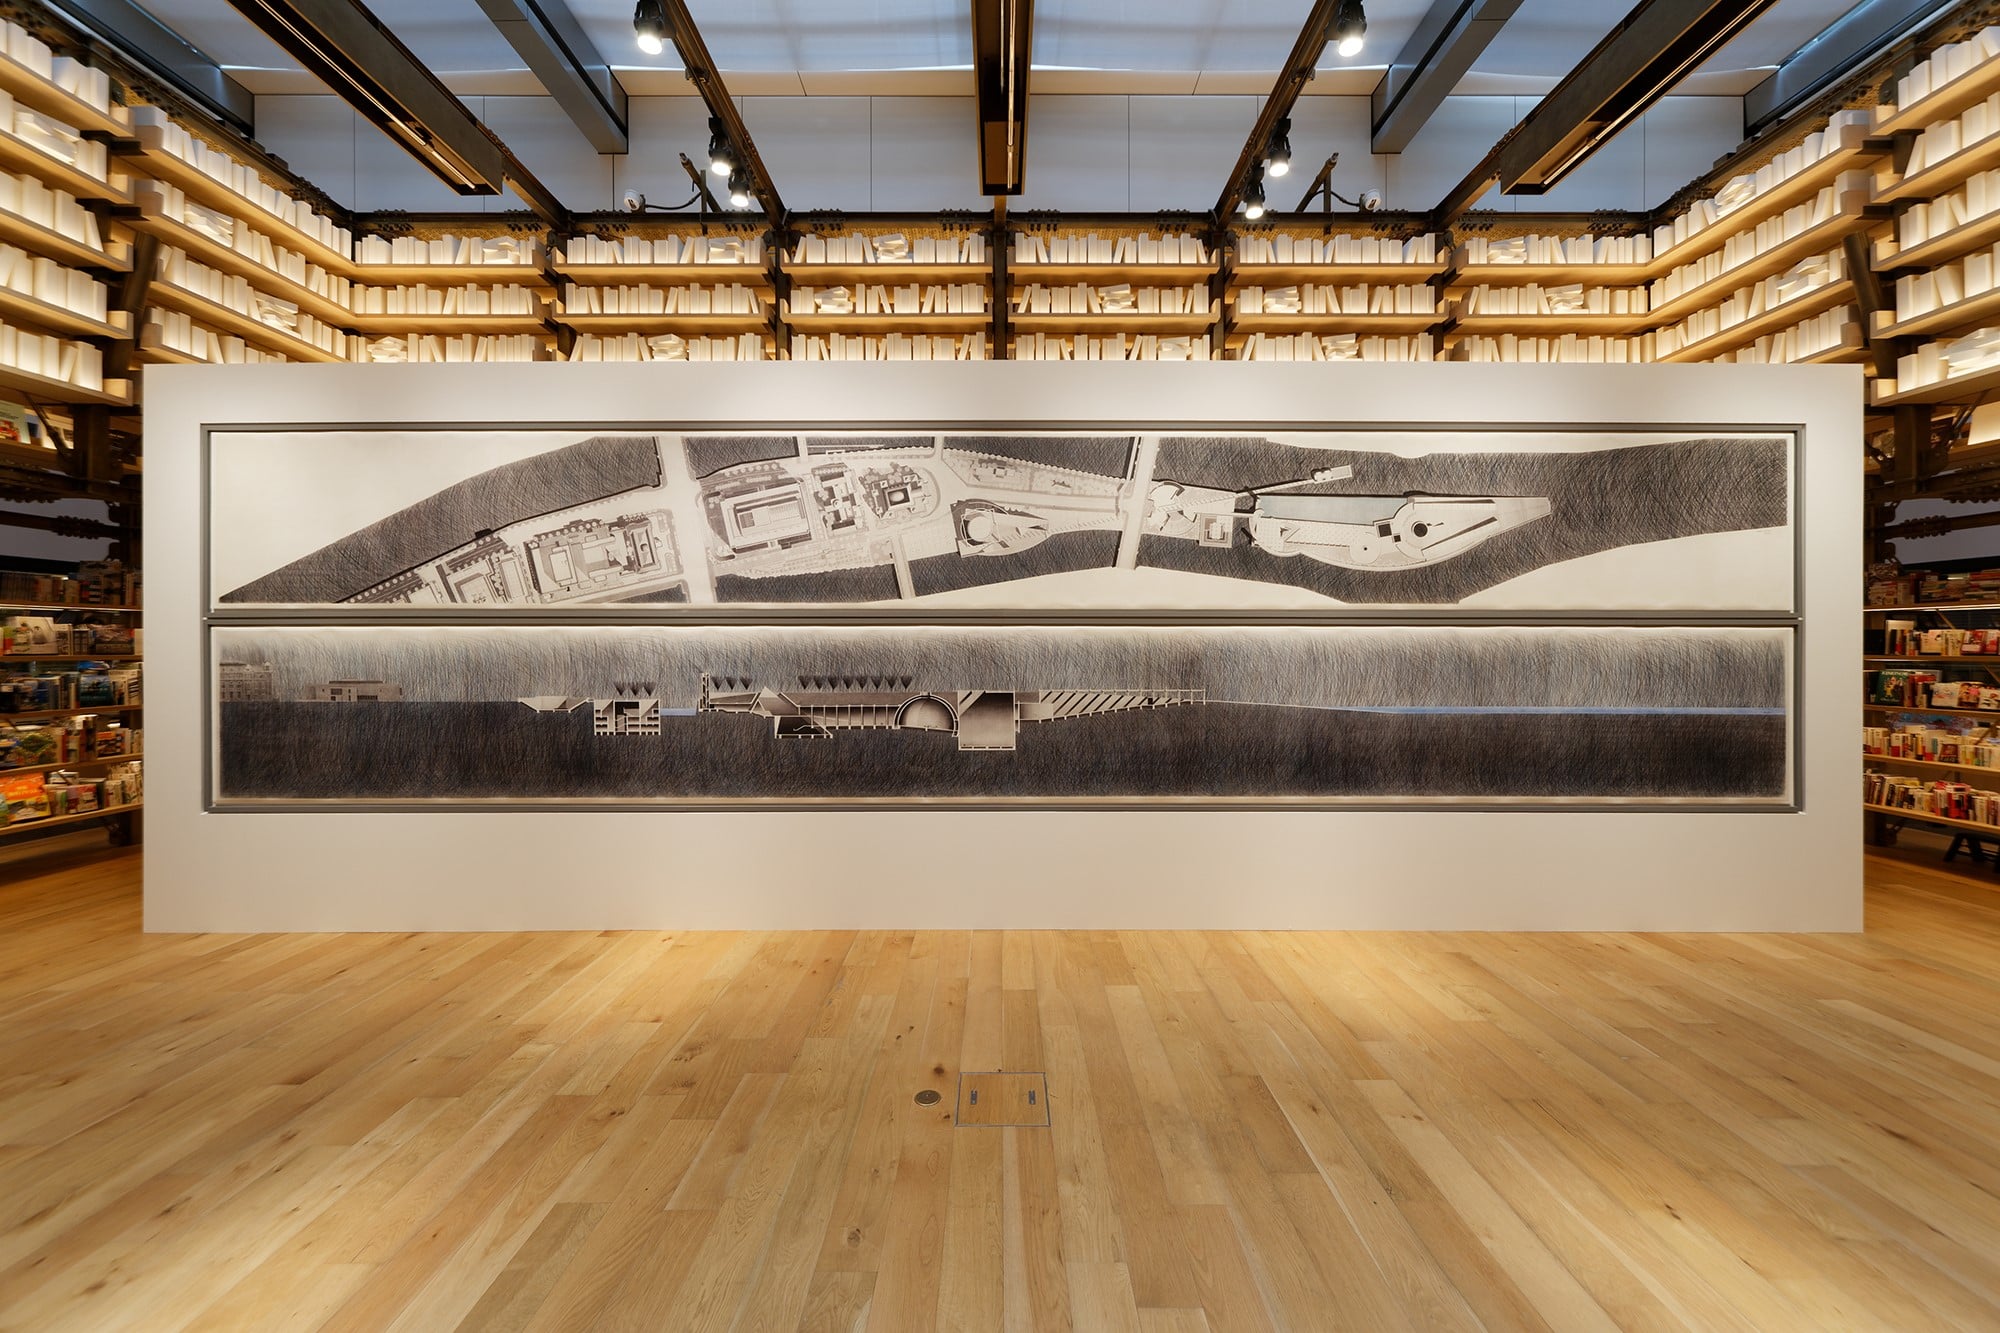  In June of 2019, two drawings of the 10-meter Nakanoshima Project was displayed at the “Tadao Ando: Challenge” exhibition at the Tsutaya Shoten Ginza in GINZA SIX. The displayed work was a reproduction using high definition print technology from the original work which was all hand-drawn. Ando’s work portfolio, ANDO BOX V includes the “Urban Egg”, which was announced from amanasalto. http://amanasalto.com/©amanasalto